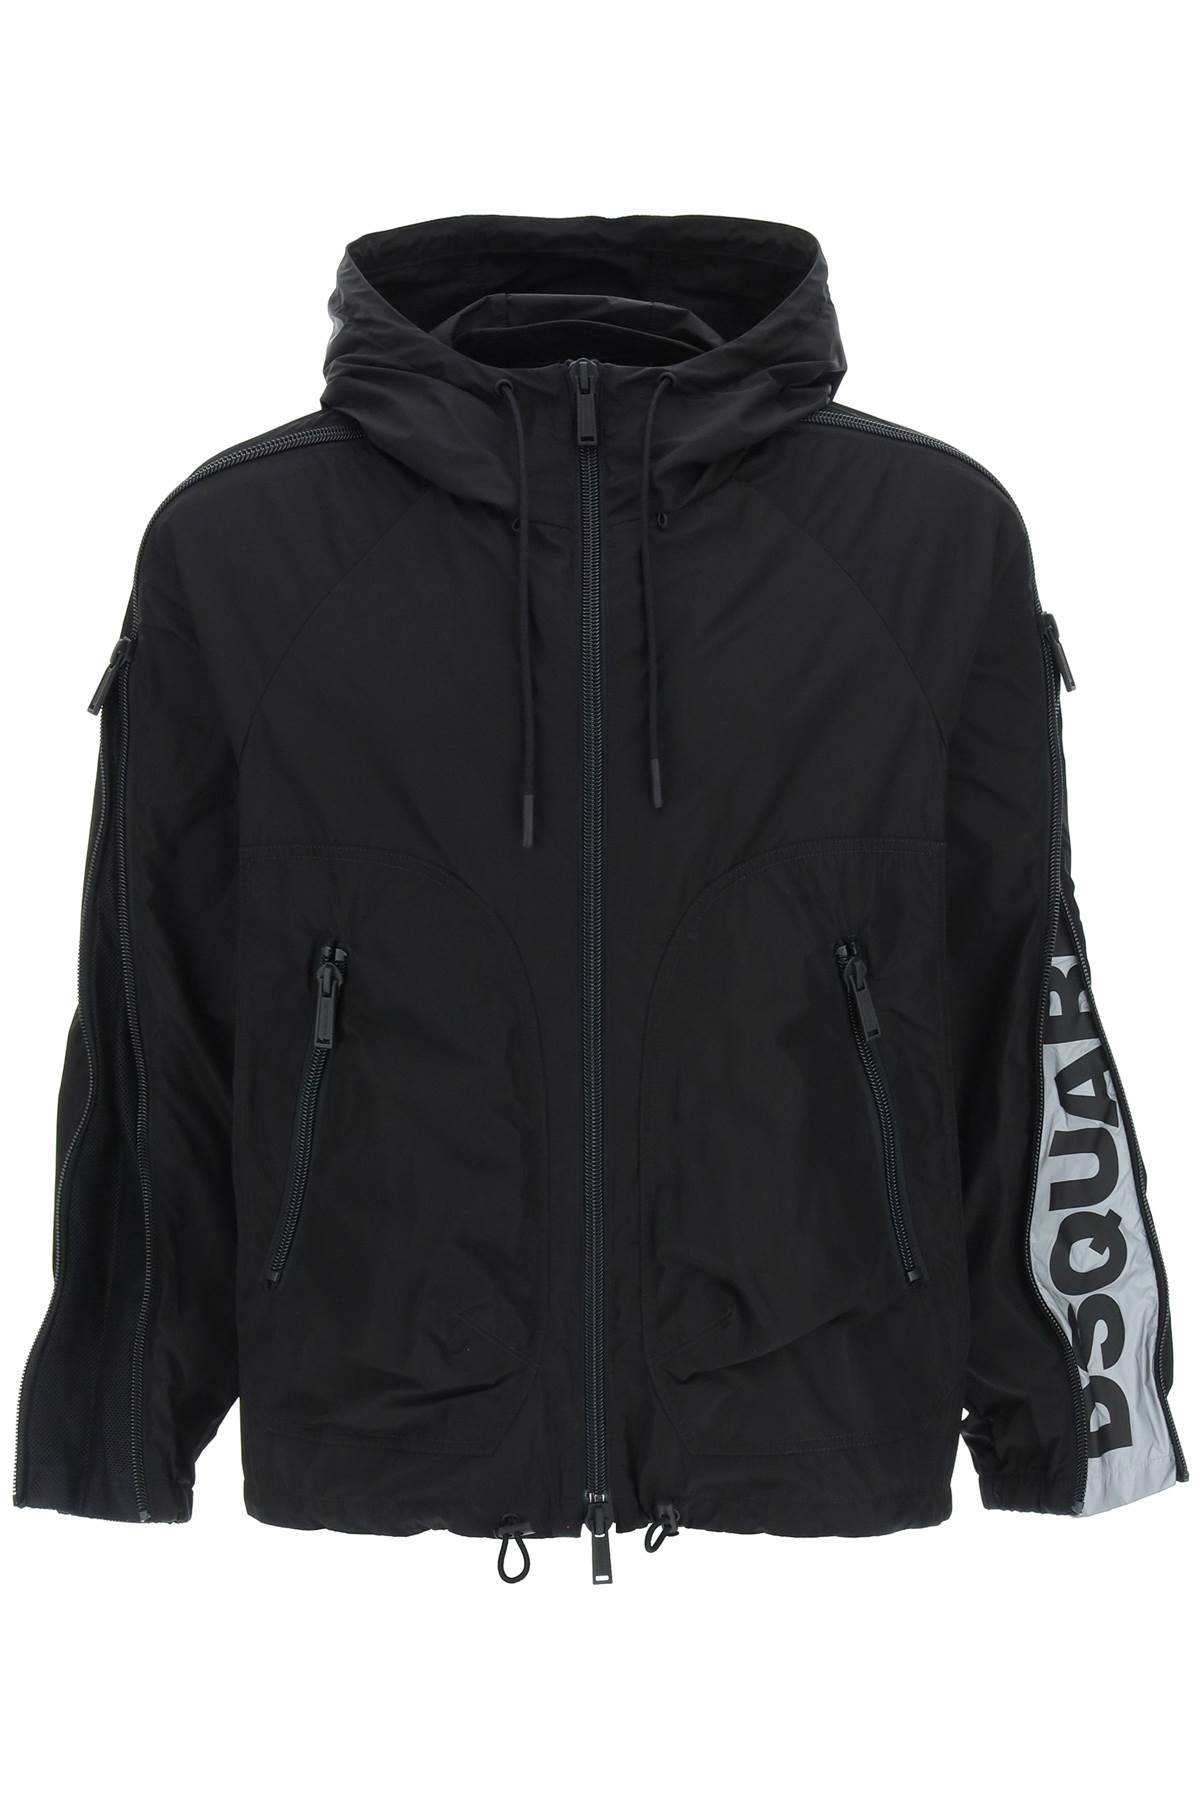 Dsquared2 Jacket With Zipped Sleeves